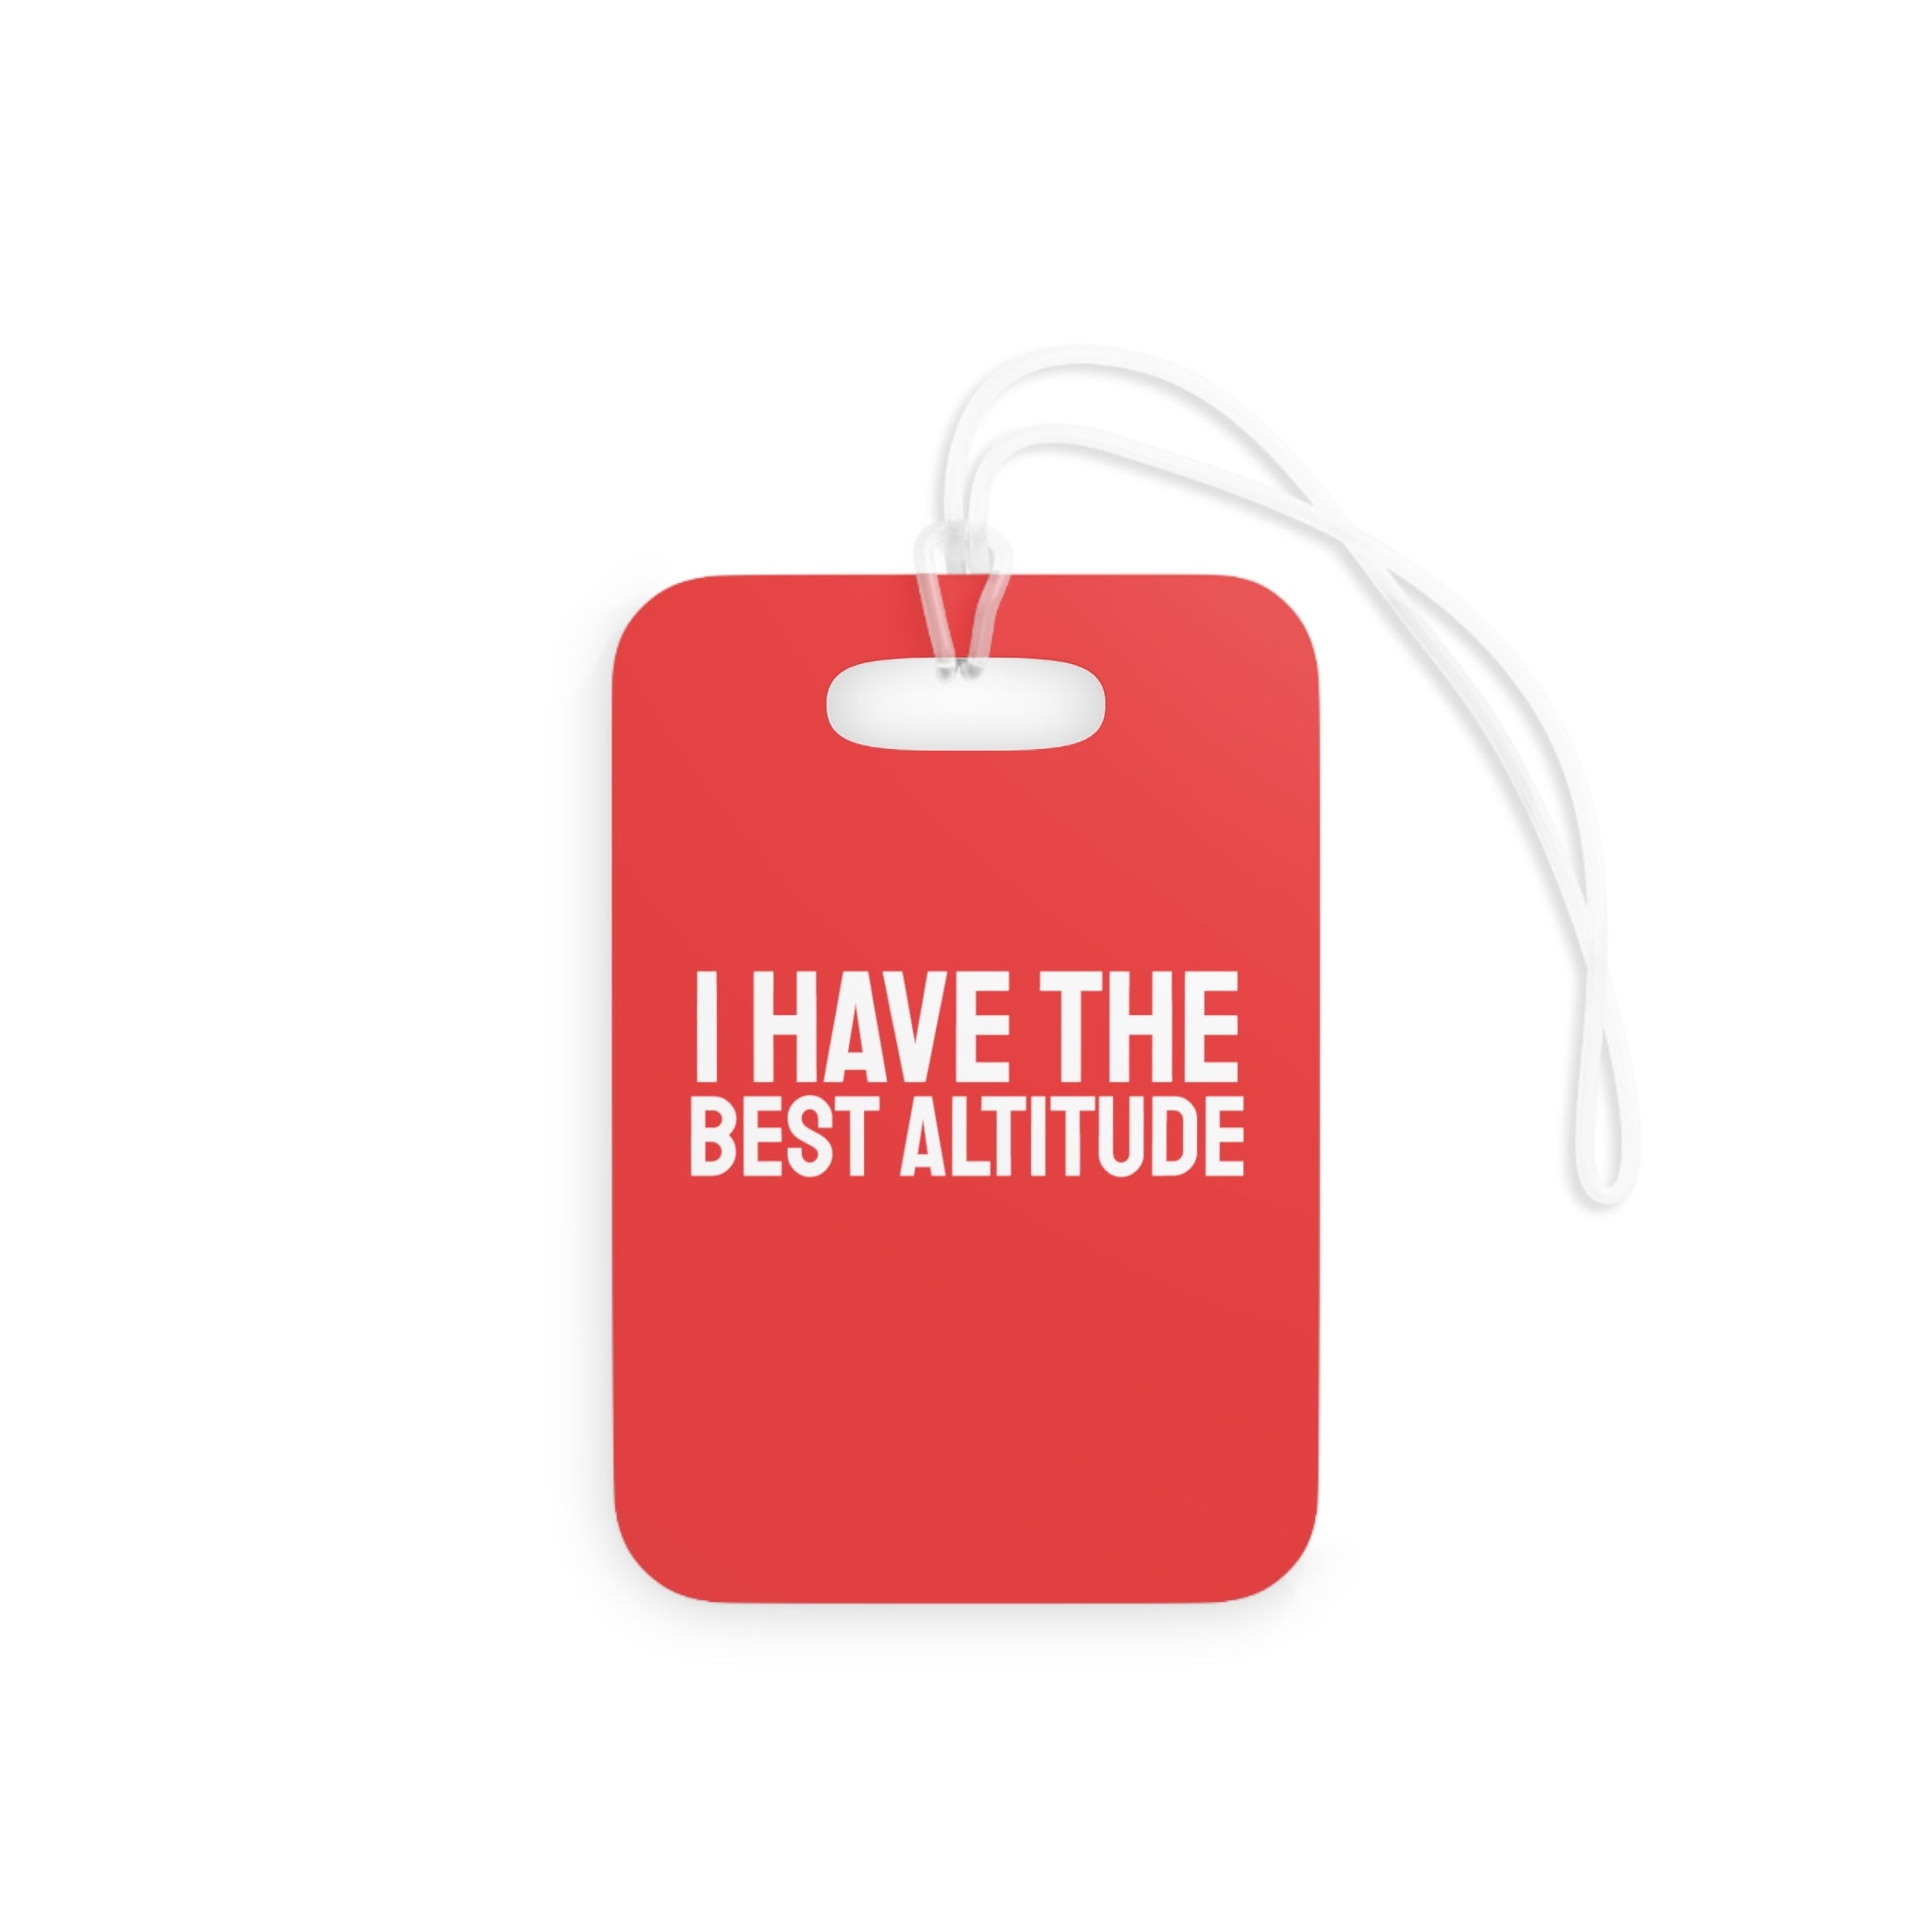 I have the best altitude Luggage Tag (Red)